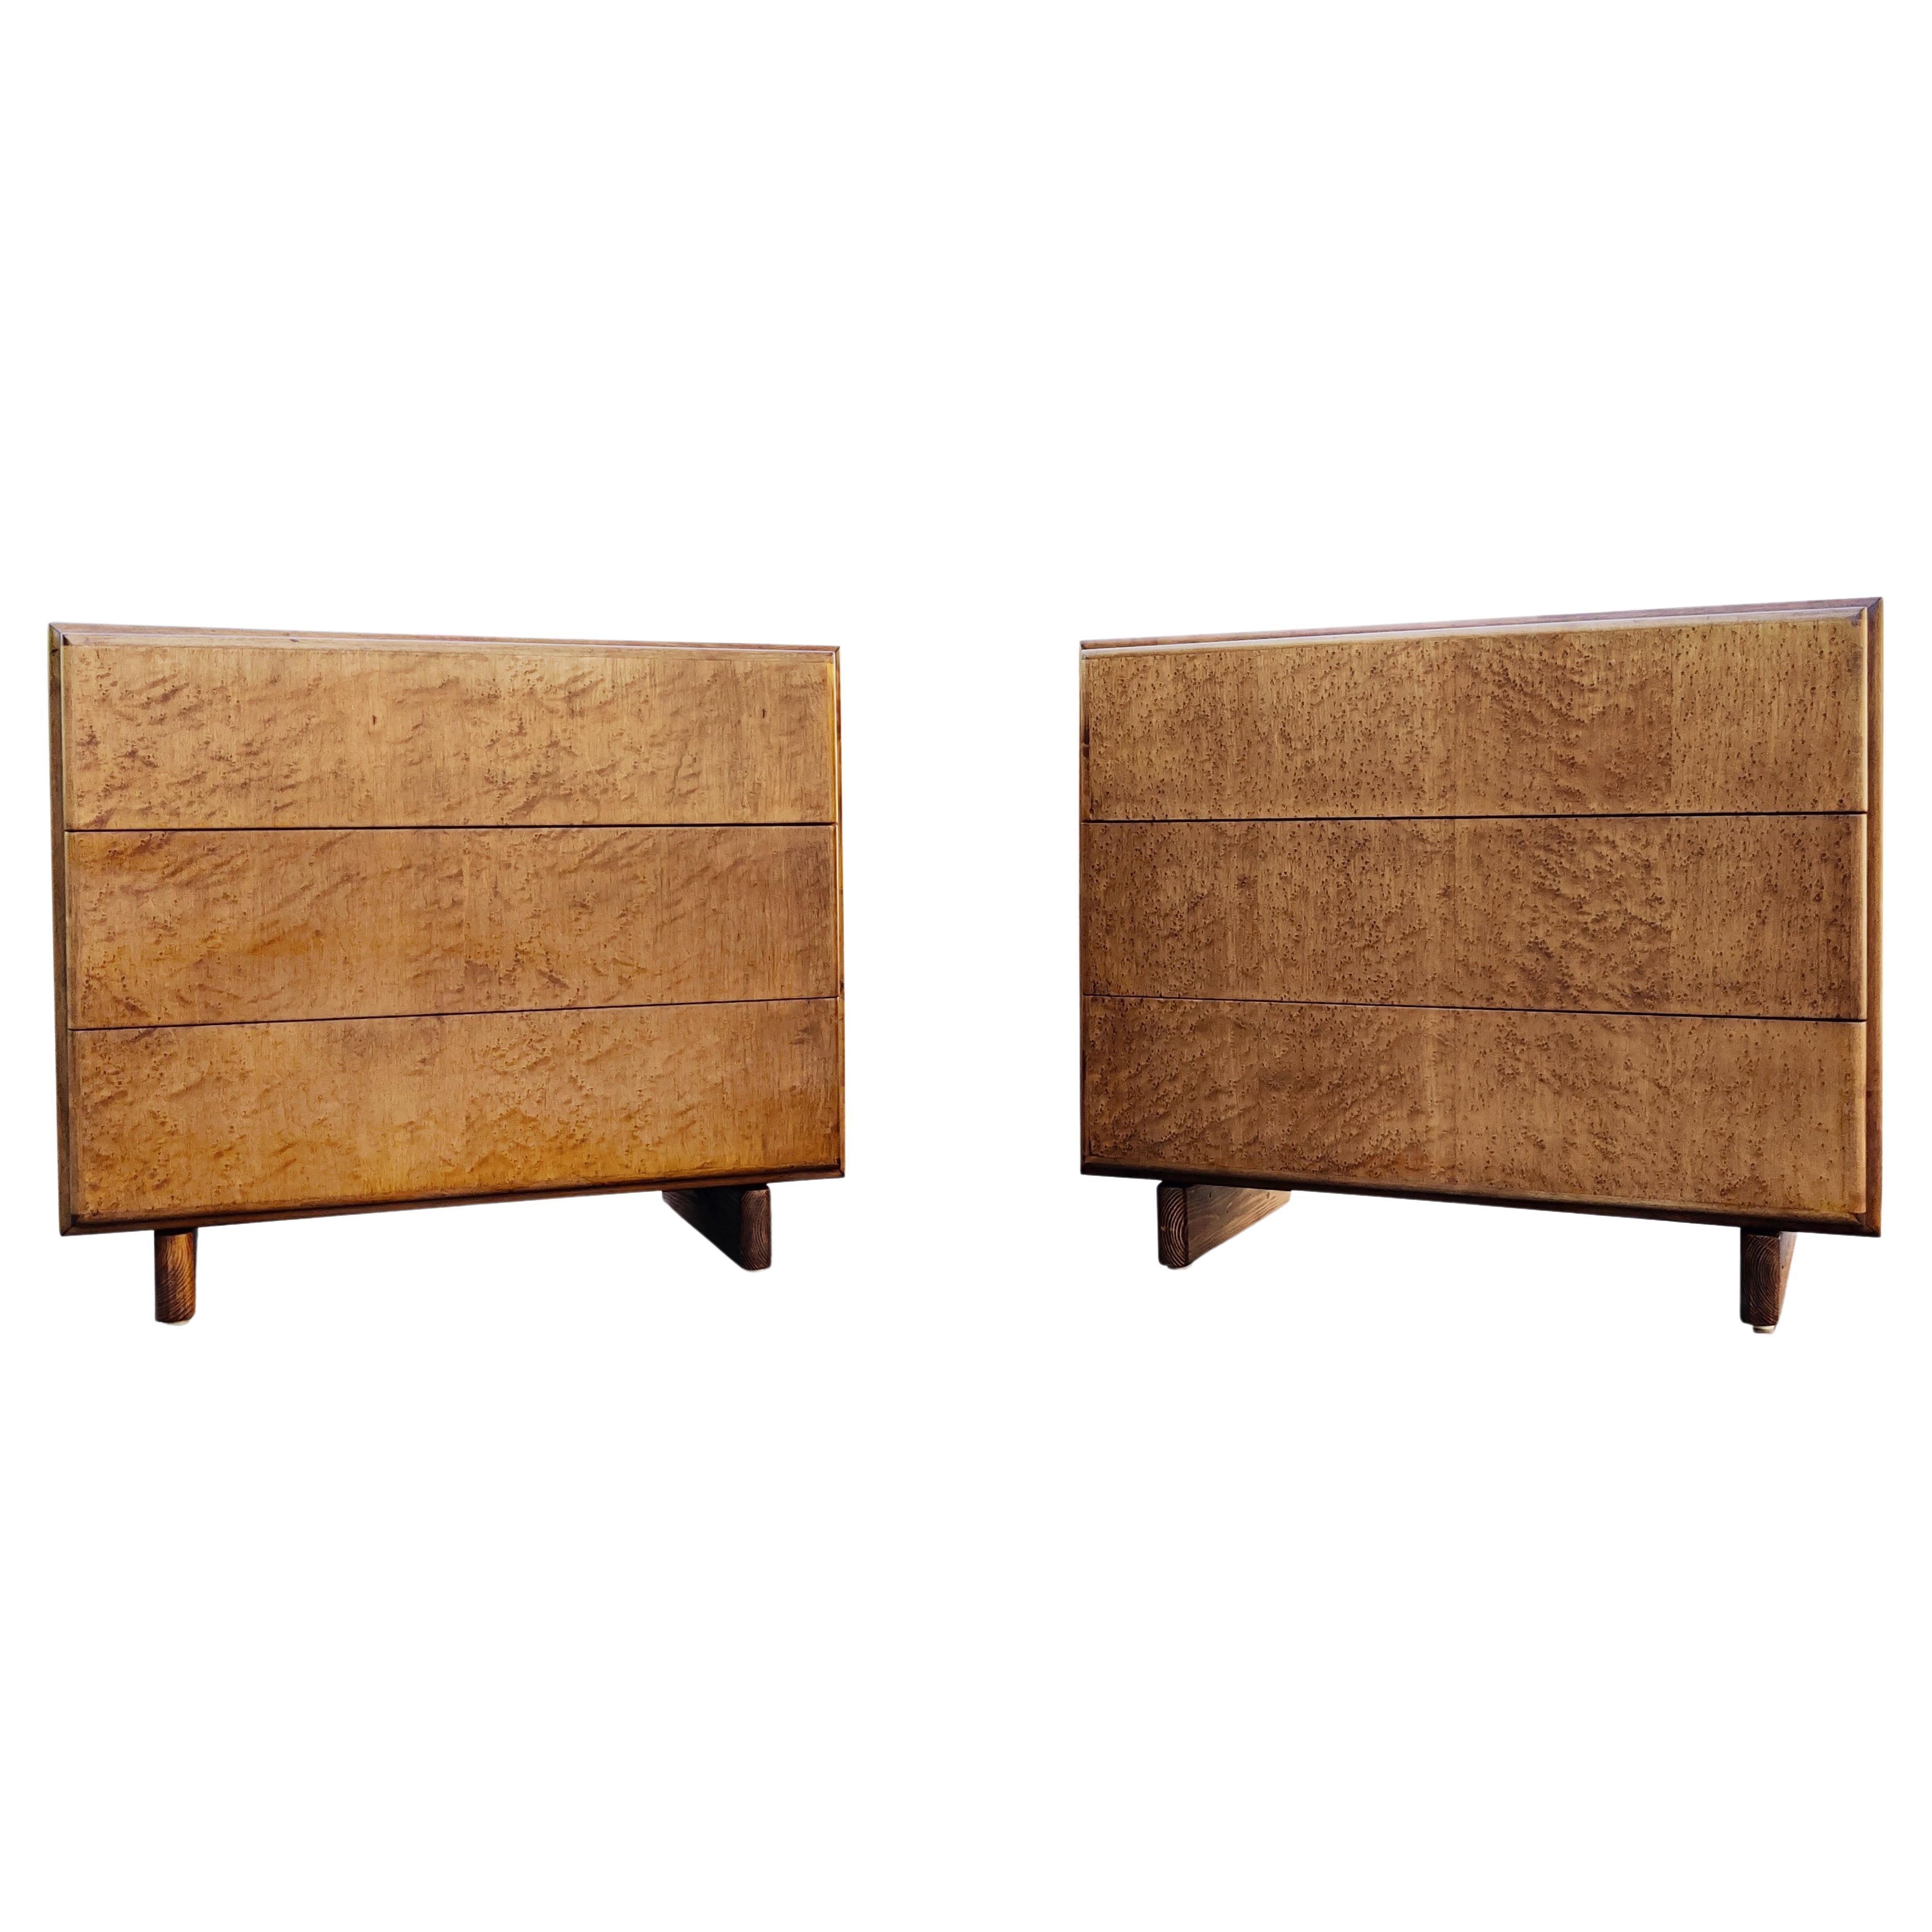 A wonderful pair of signed Milo Baughman for Thayer Coggin 3-drawer cabinets that are just the right size to either be a pair of small dressers, or a pair of large nightstands. Made in the USA in the late 70s or early 80s, the pair is constructed of